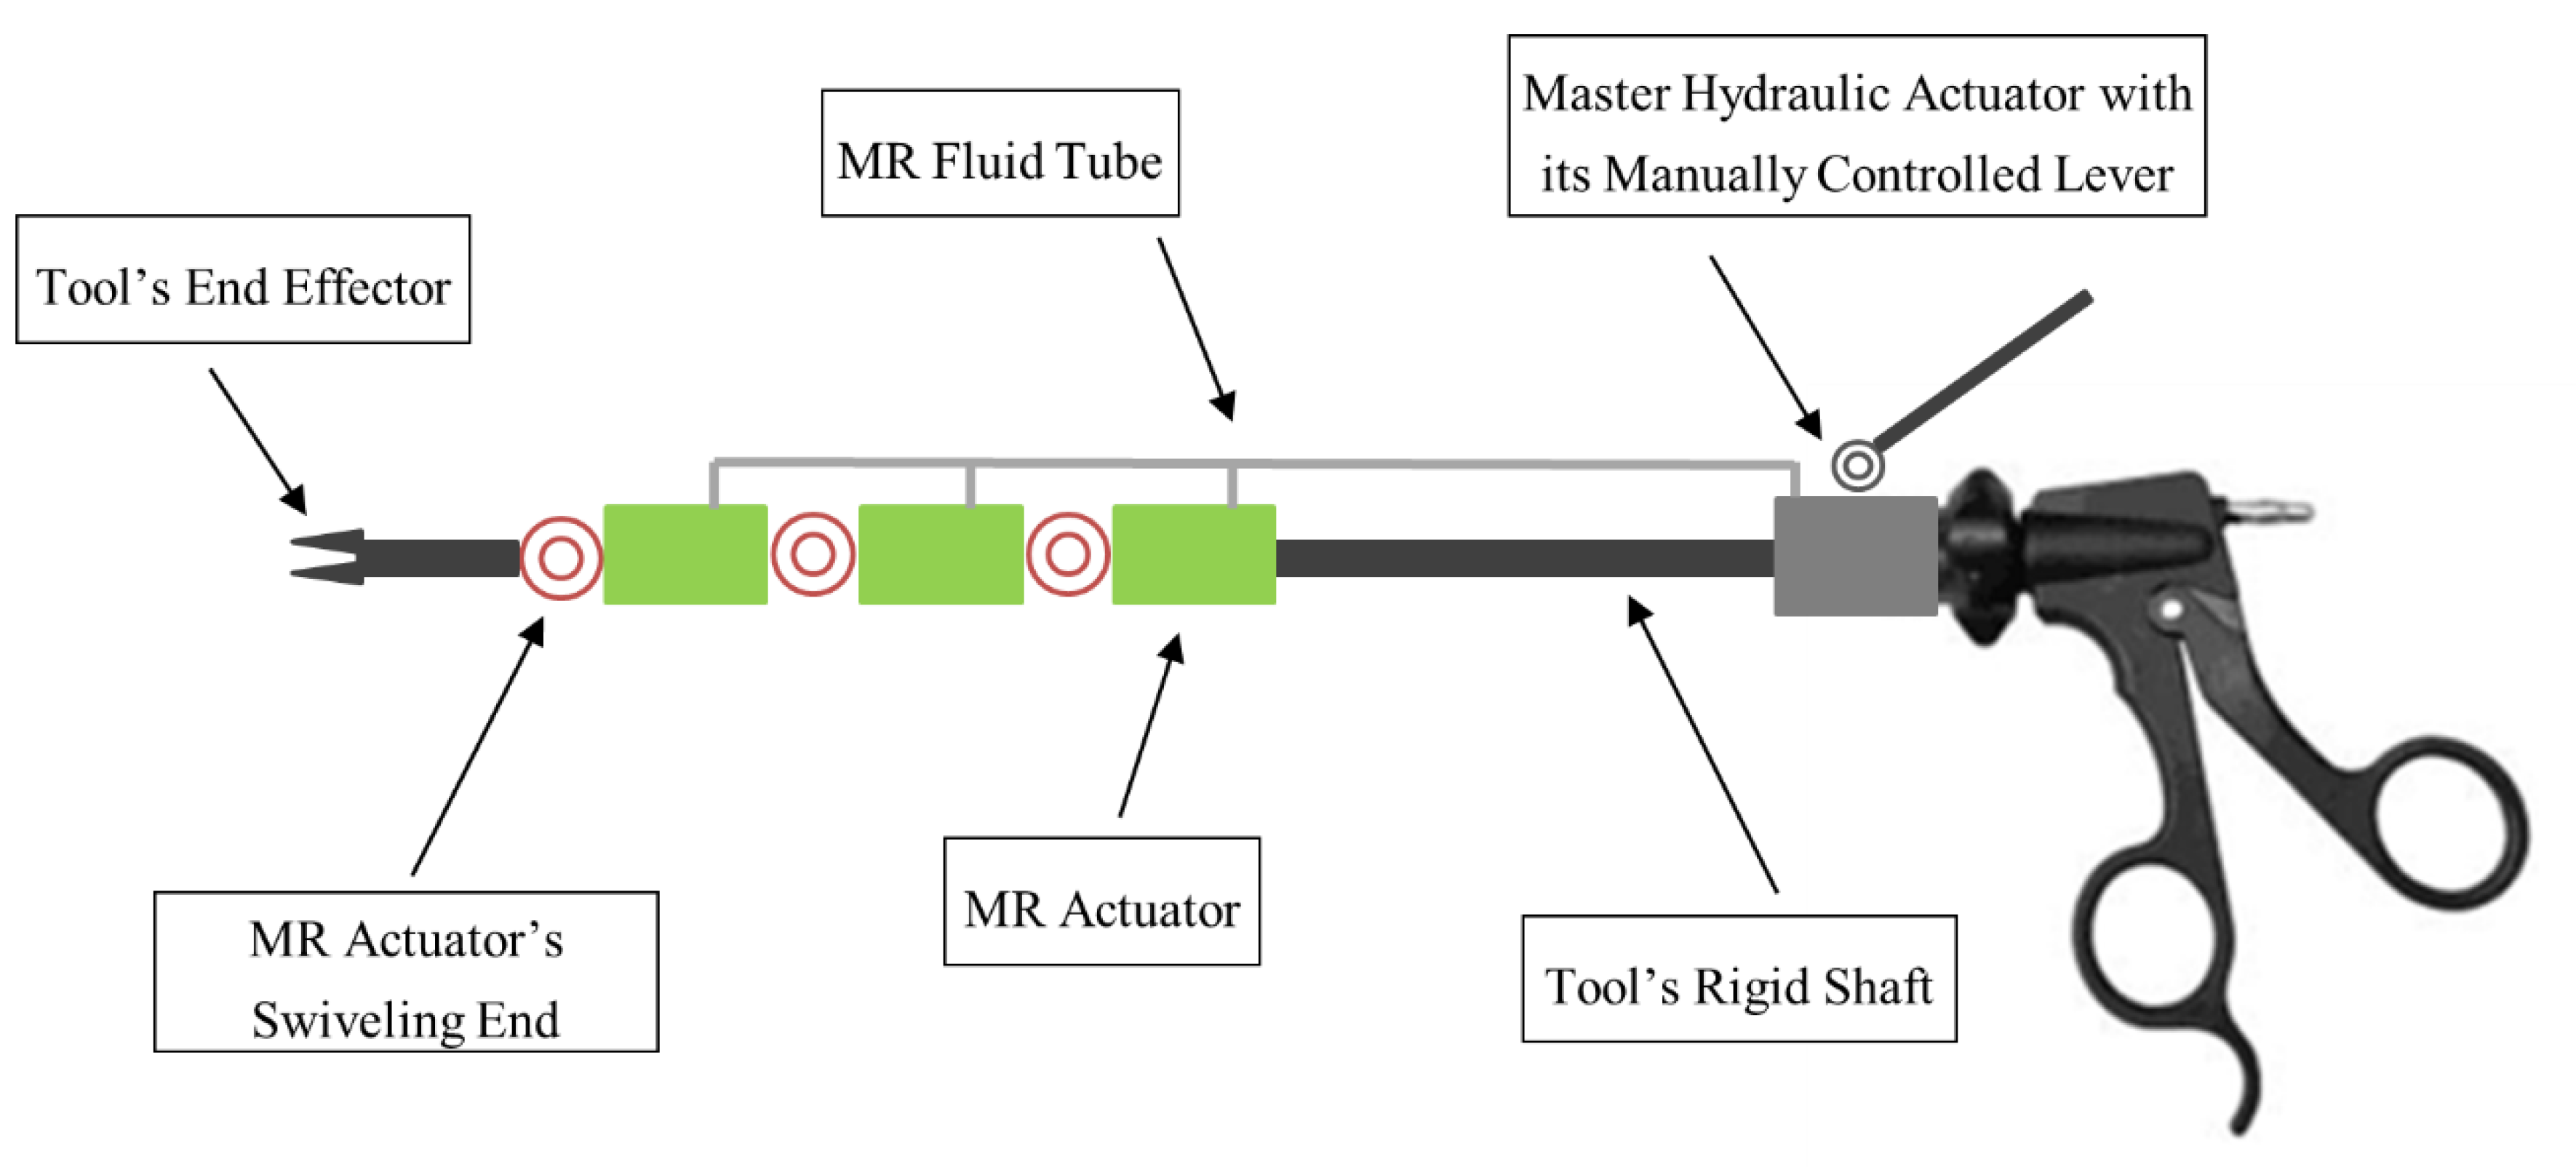 Materials Free Full Text A Novel Hydraulic Actuation System Utilizing Magnetorheological Fluids For Single Port Laparoscopic Surgery Applications Html